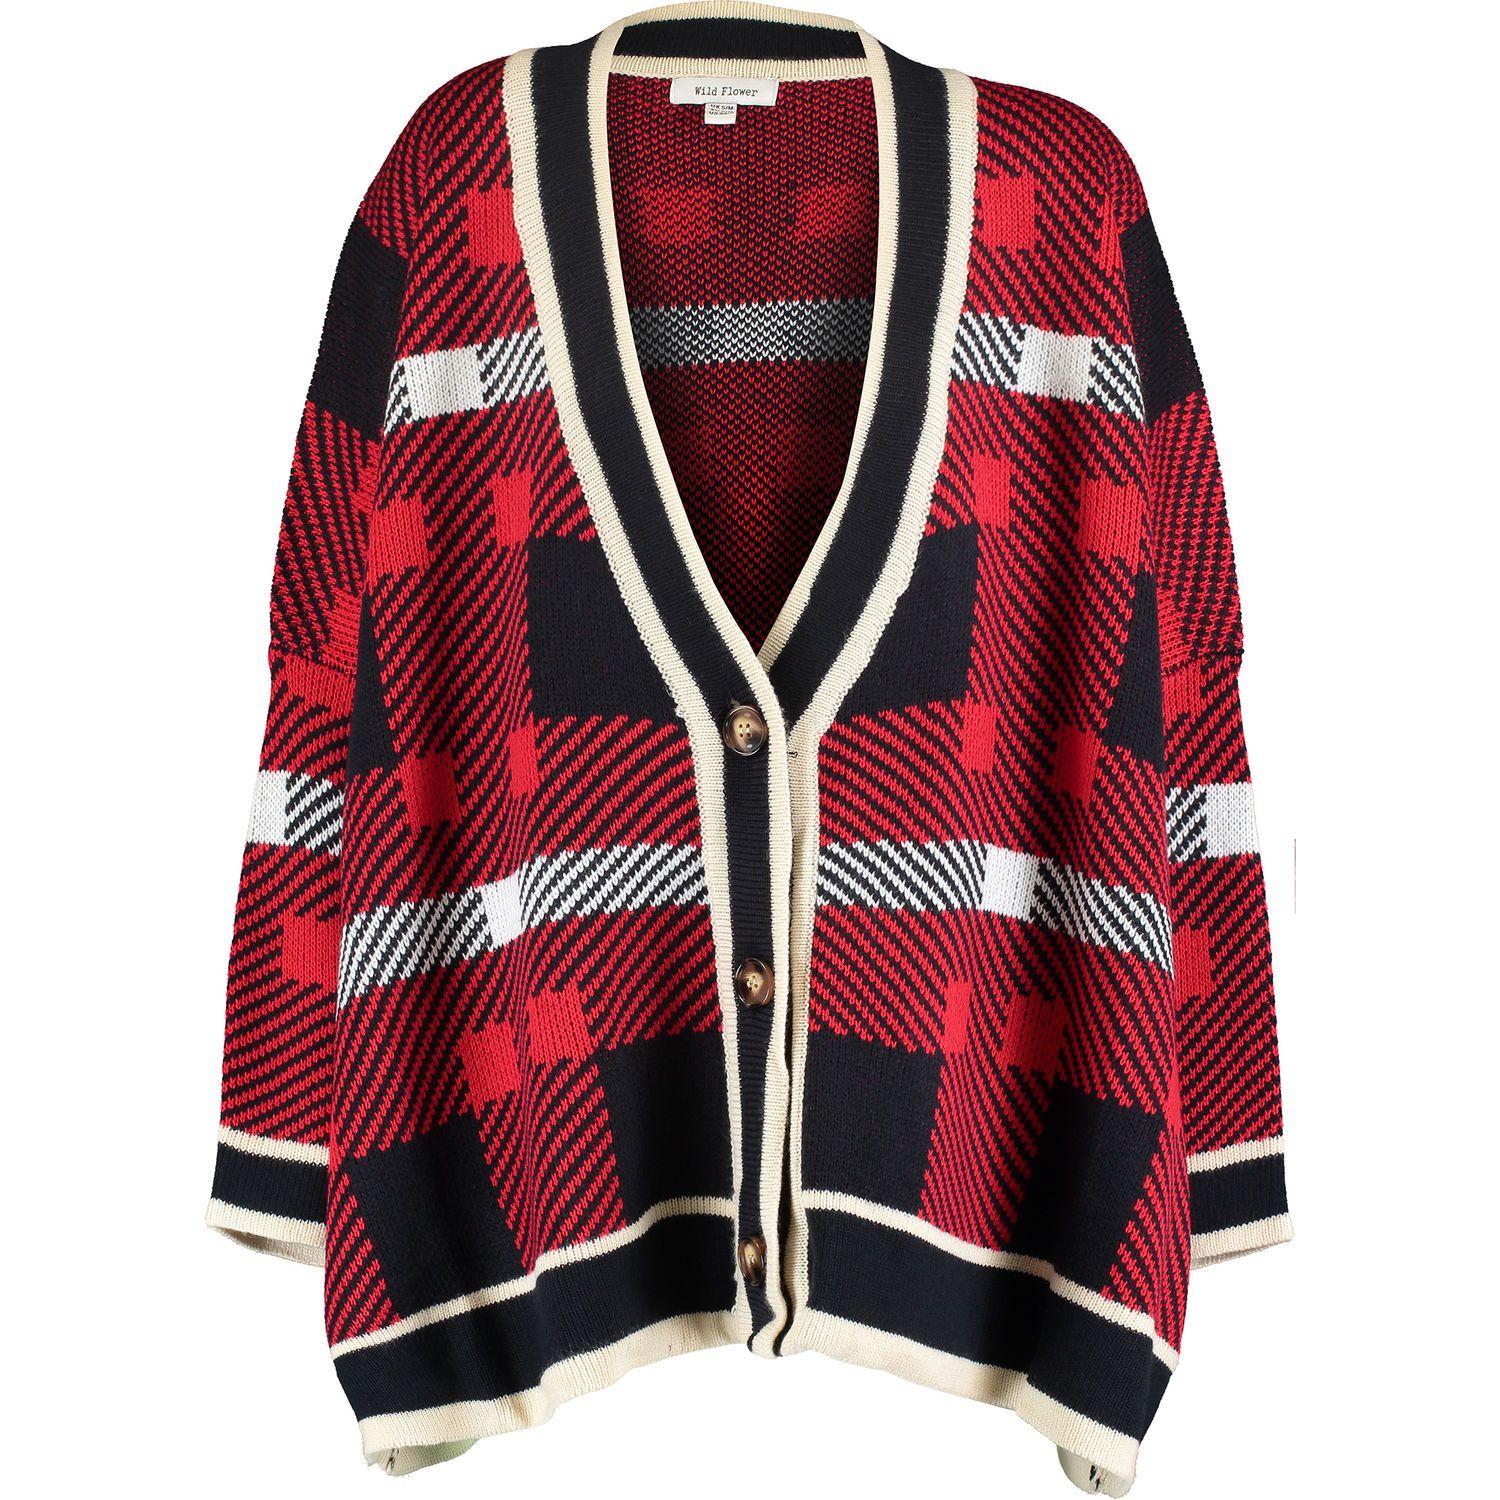 Red Check Clothing Logo - Red Check Oversized Cardigan - Knitwear - Clothing - Women - TK Maxx